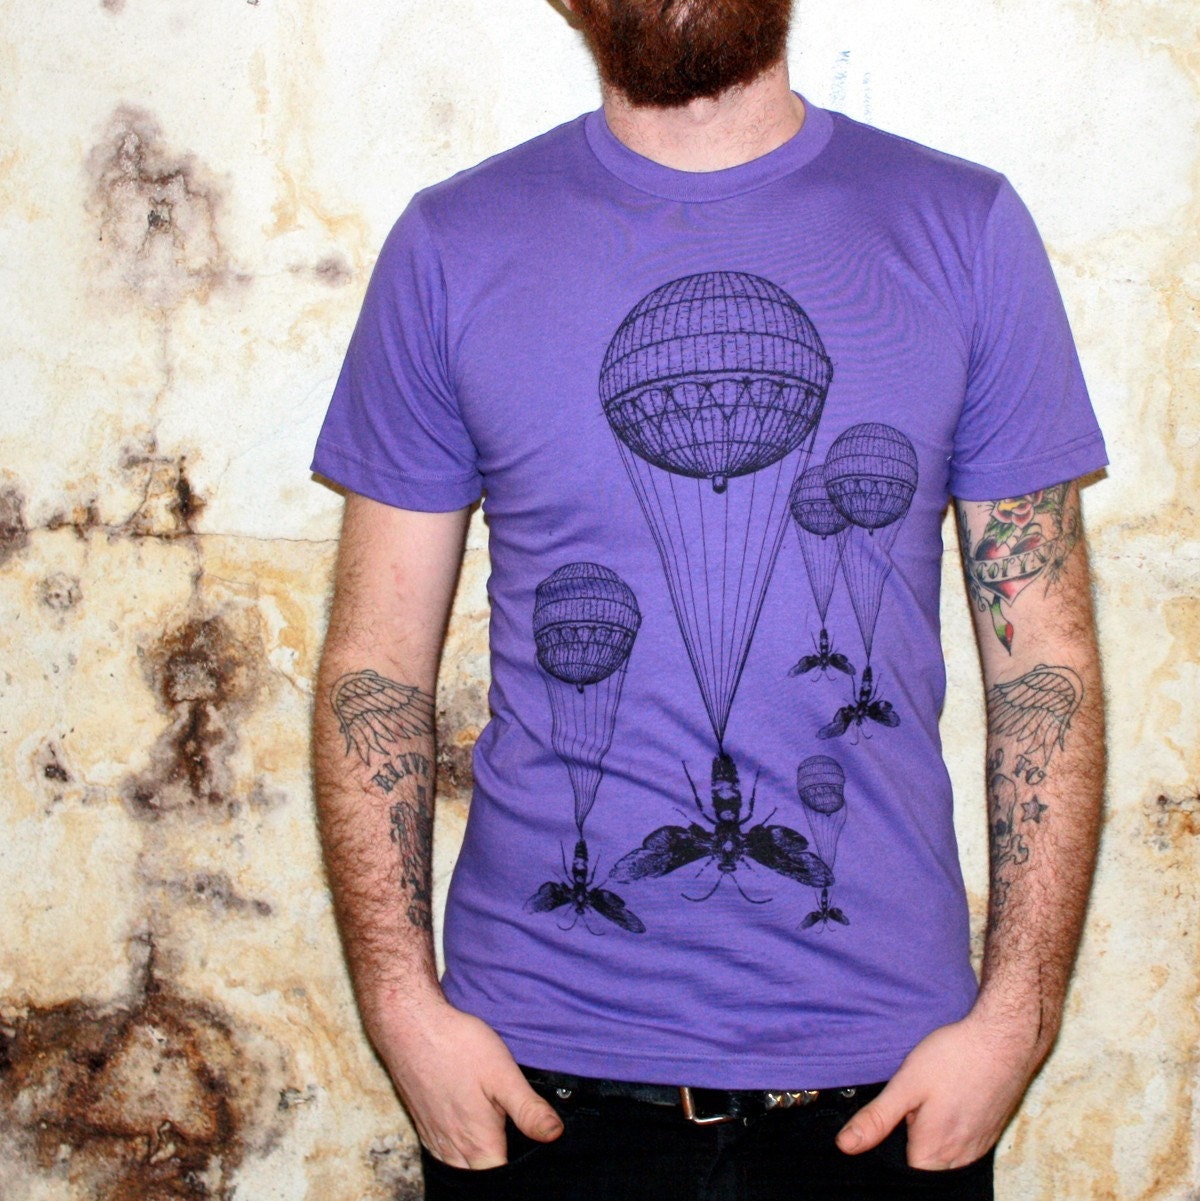 Steampunk TShirt - Hot Air Balloon Wasp Illustrated Design - American Apparel Purple Shirt - Free Shipping - Available in XS, S, M, L, XL and XXL